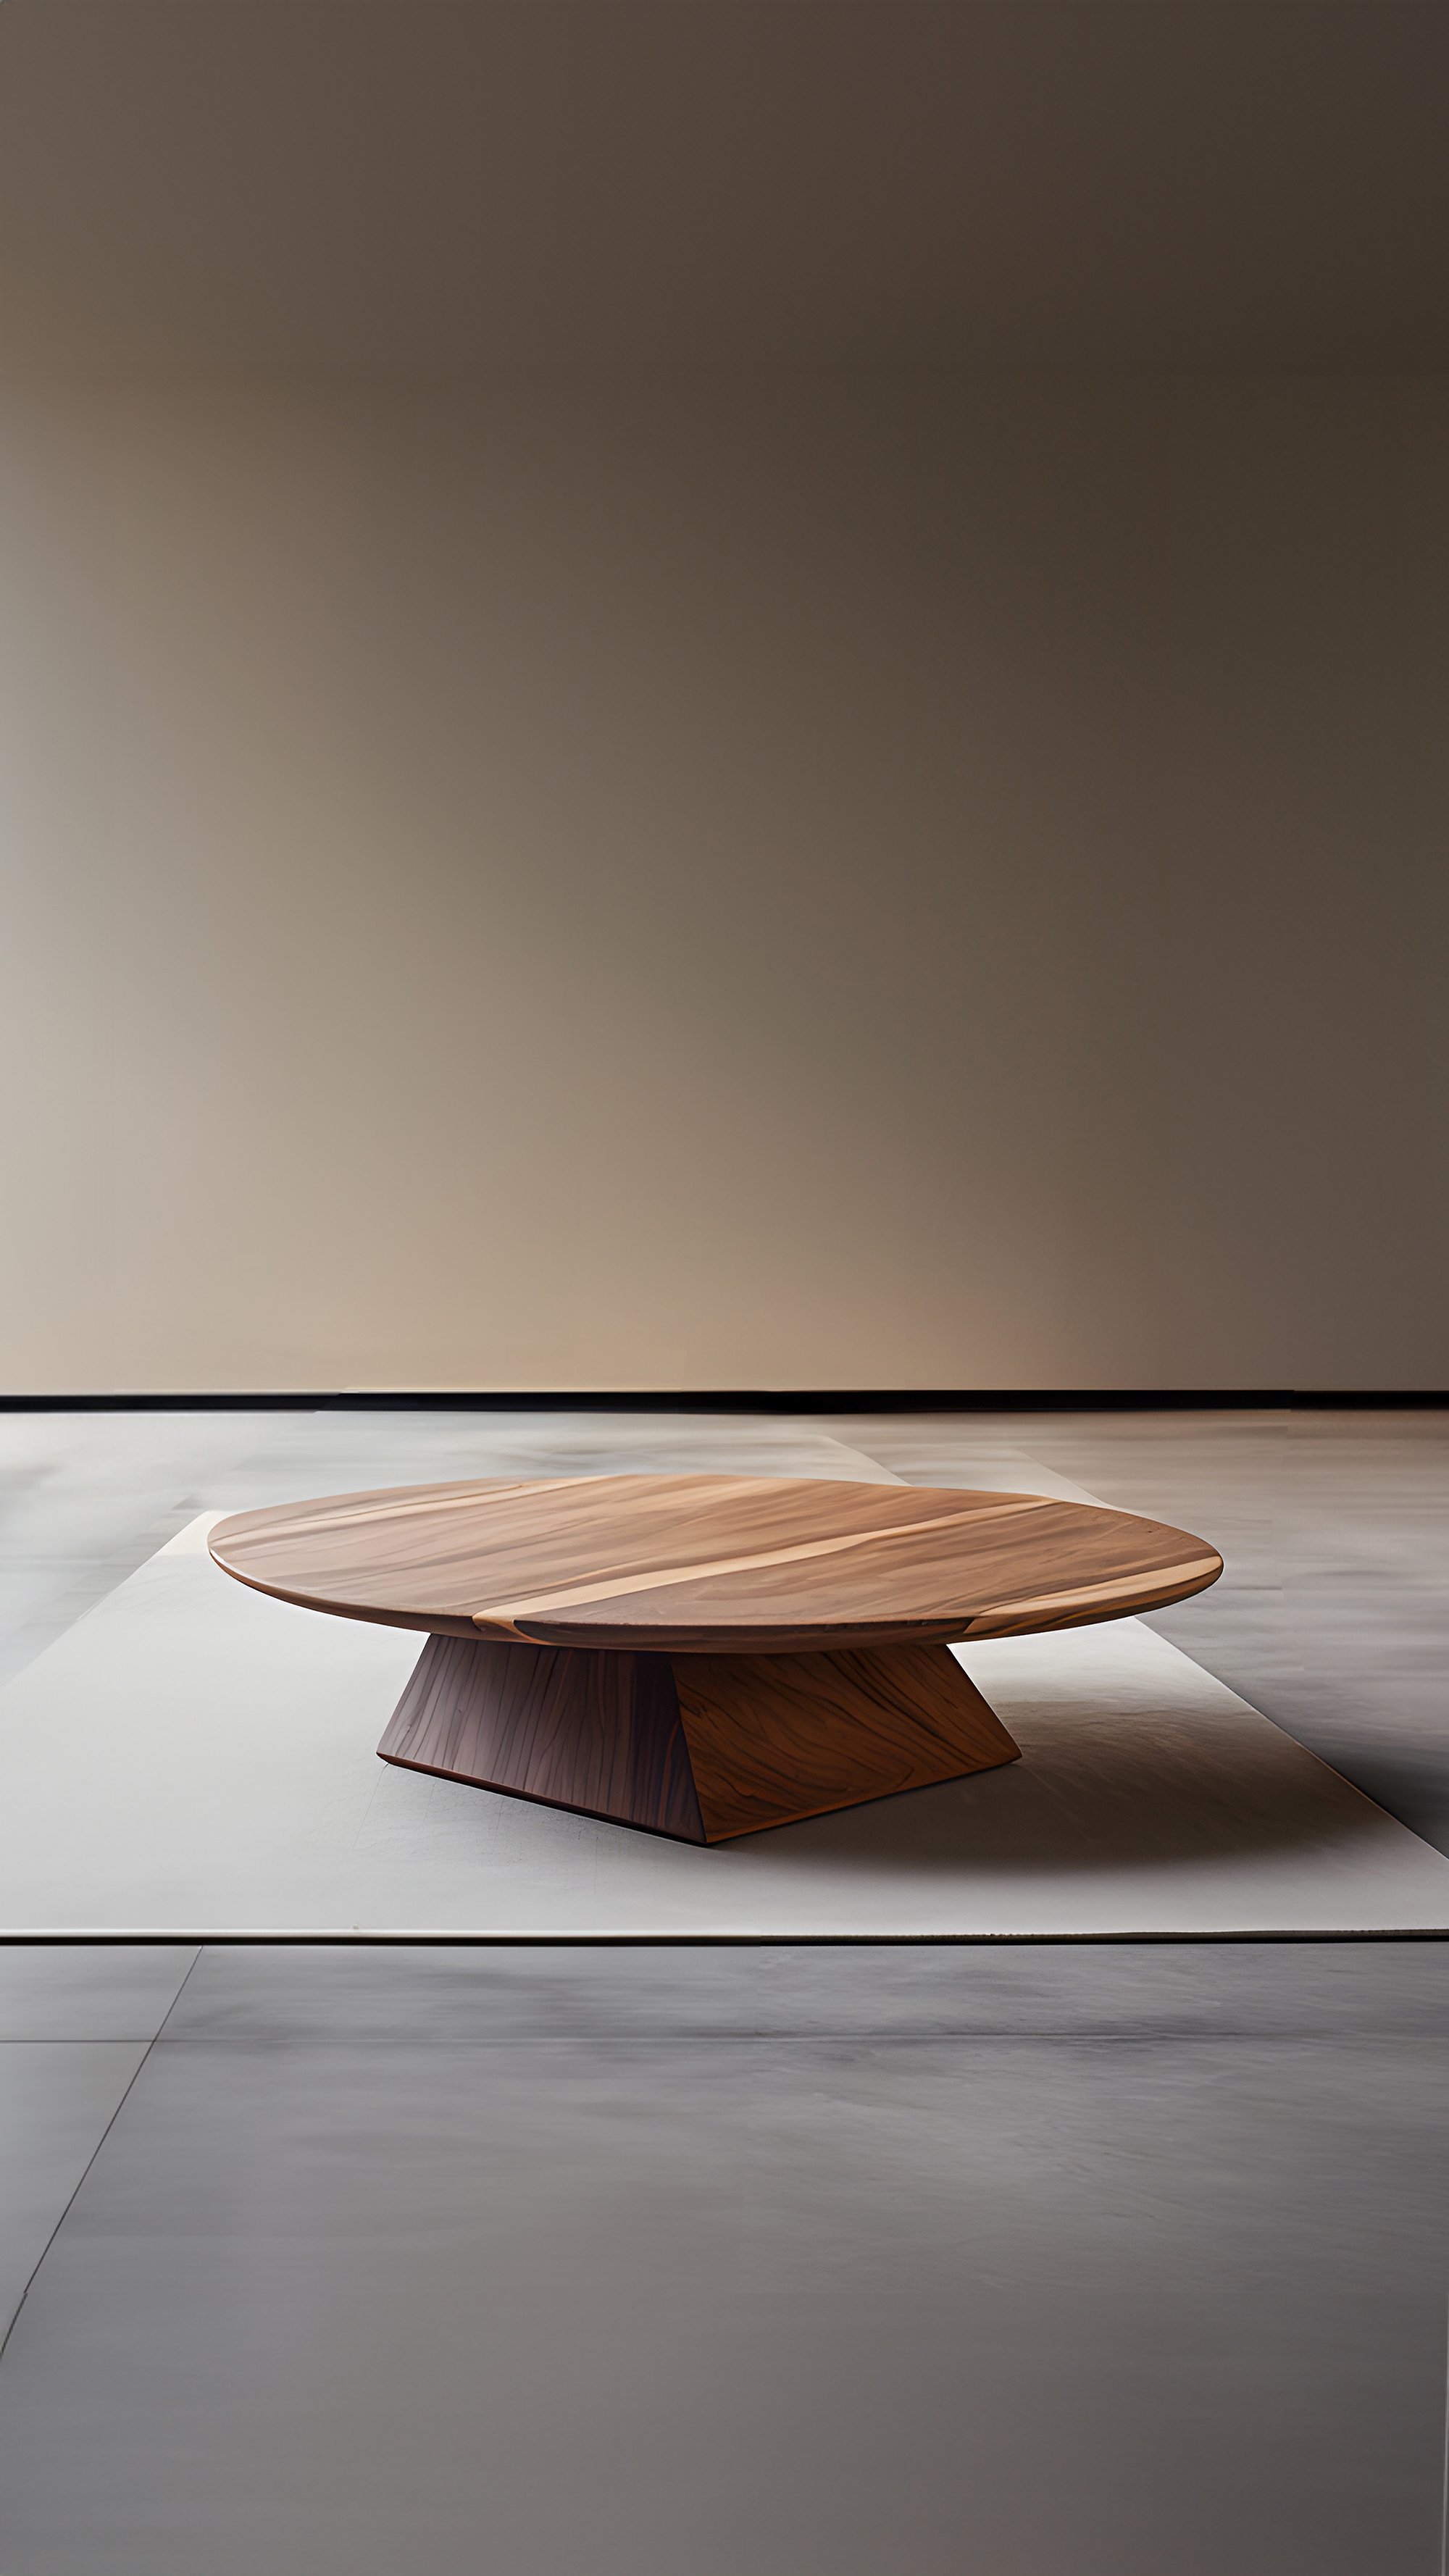 Sculptural Coffee Table Made of Solid Wood, Center Table Solace S49 by Joel Escalona — 8.jpg